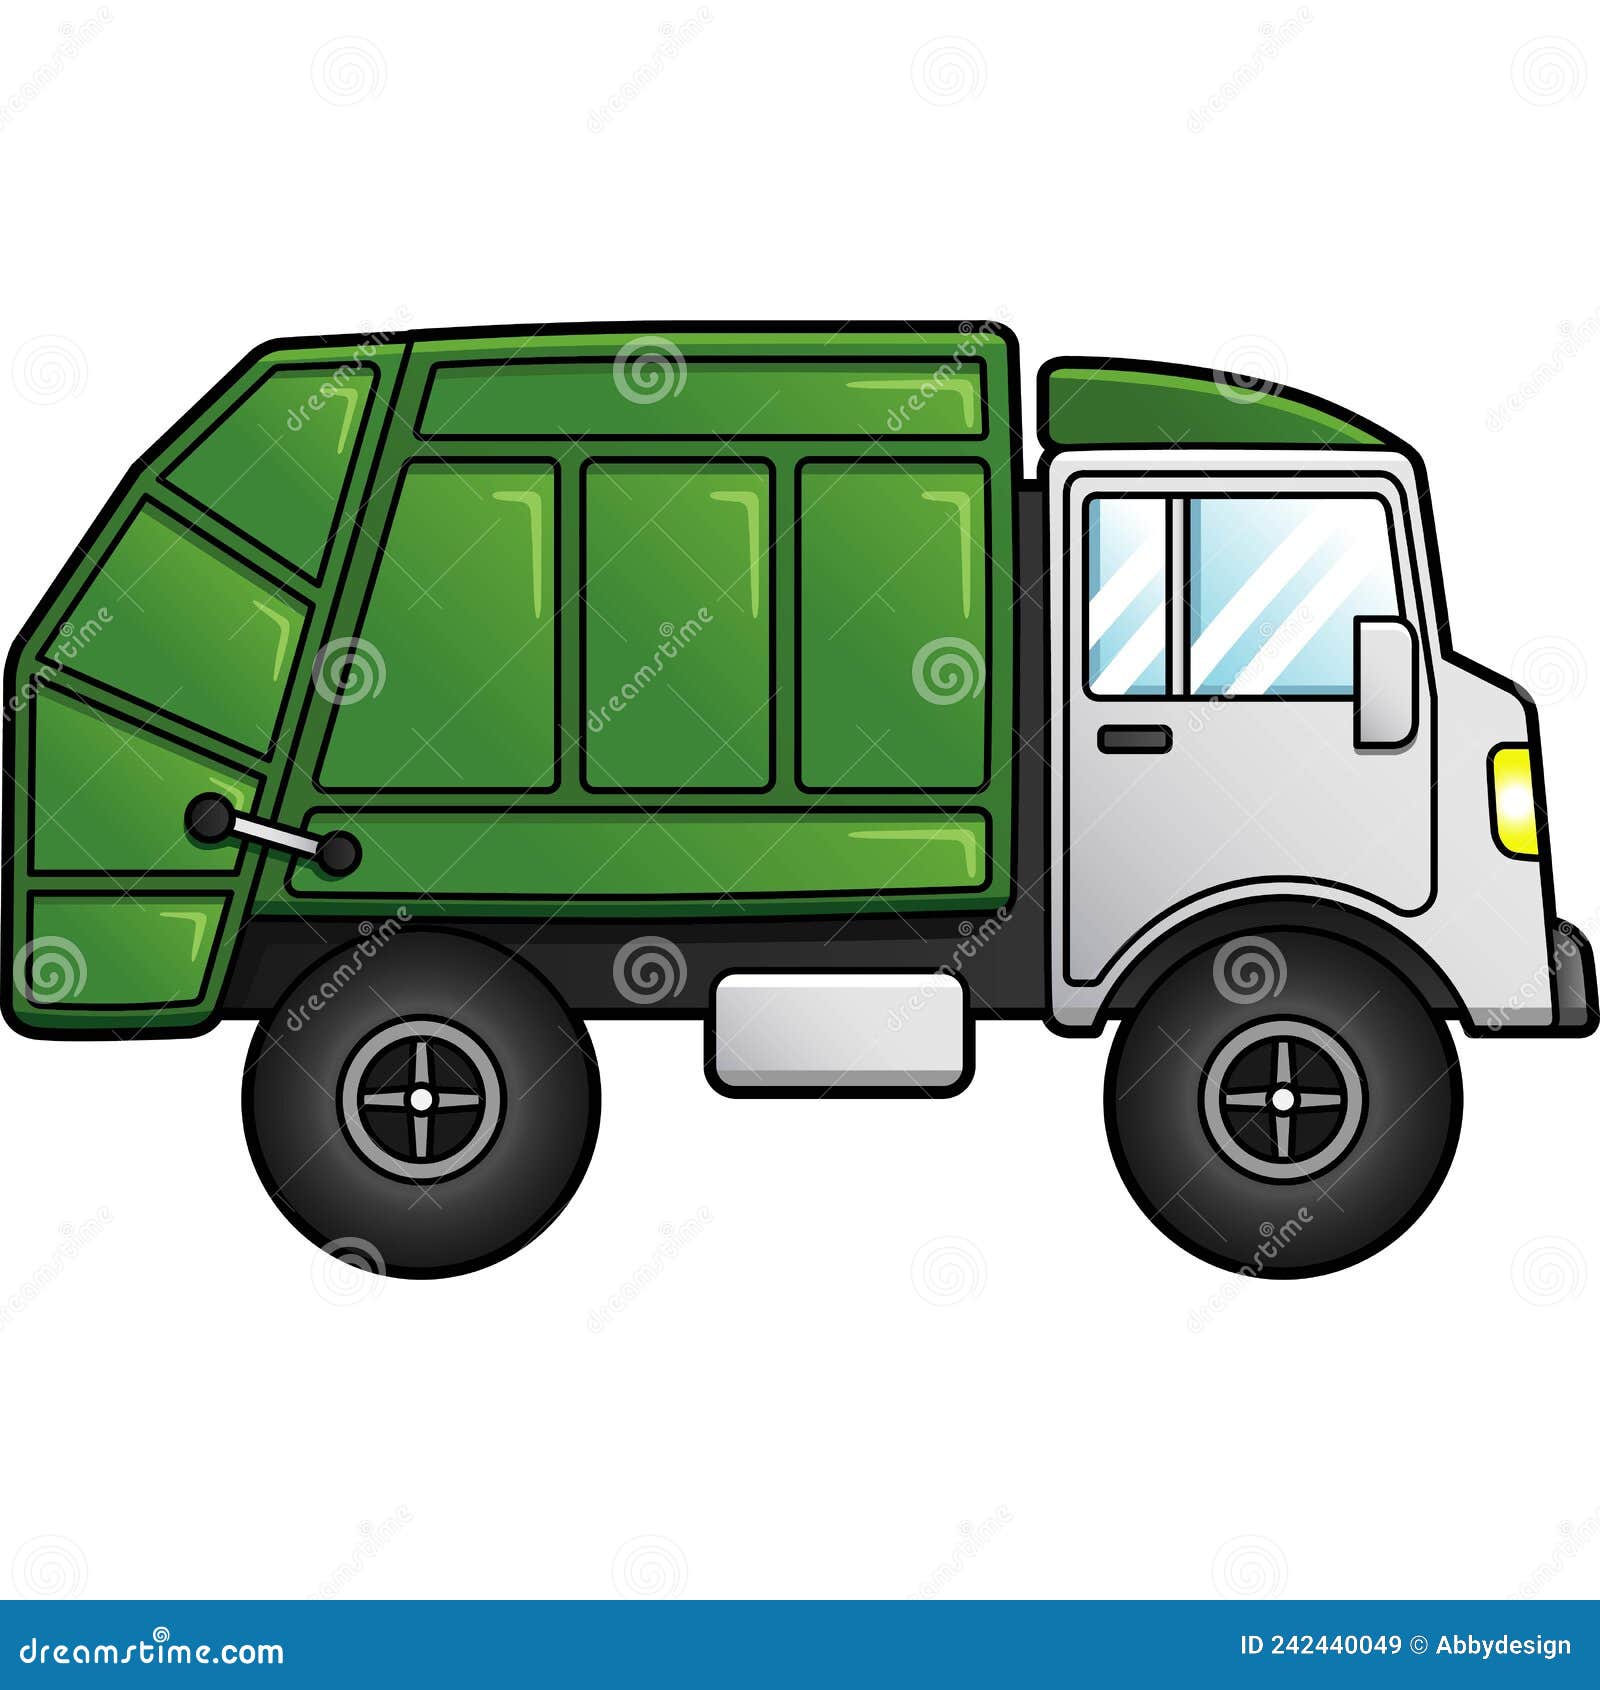 Garbage Truck Cartoon Clipart Colored Illustration Stock Vector ...